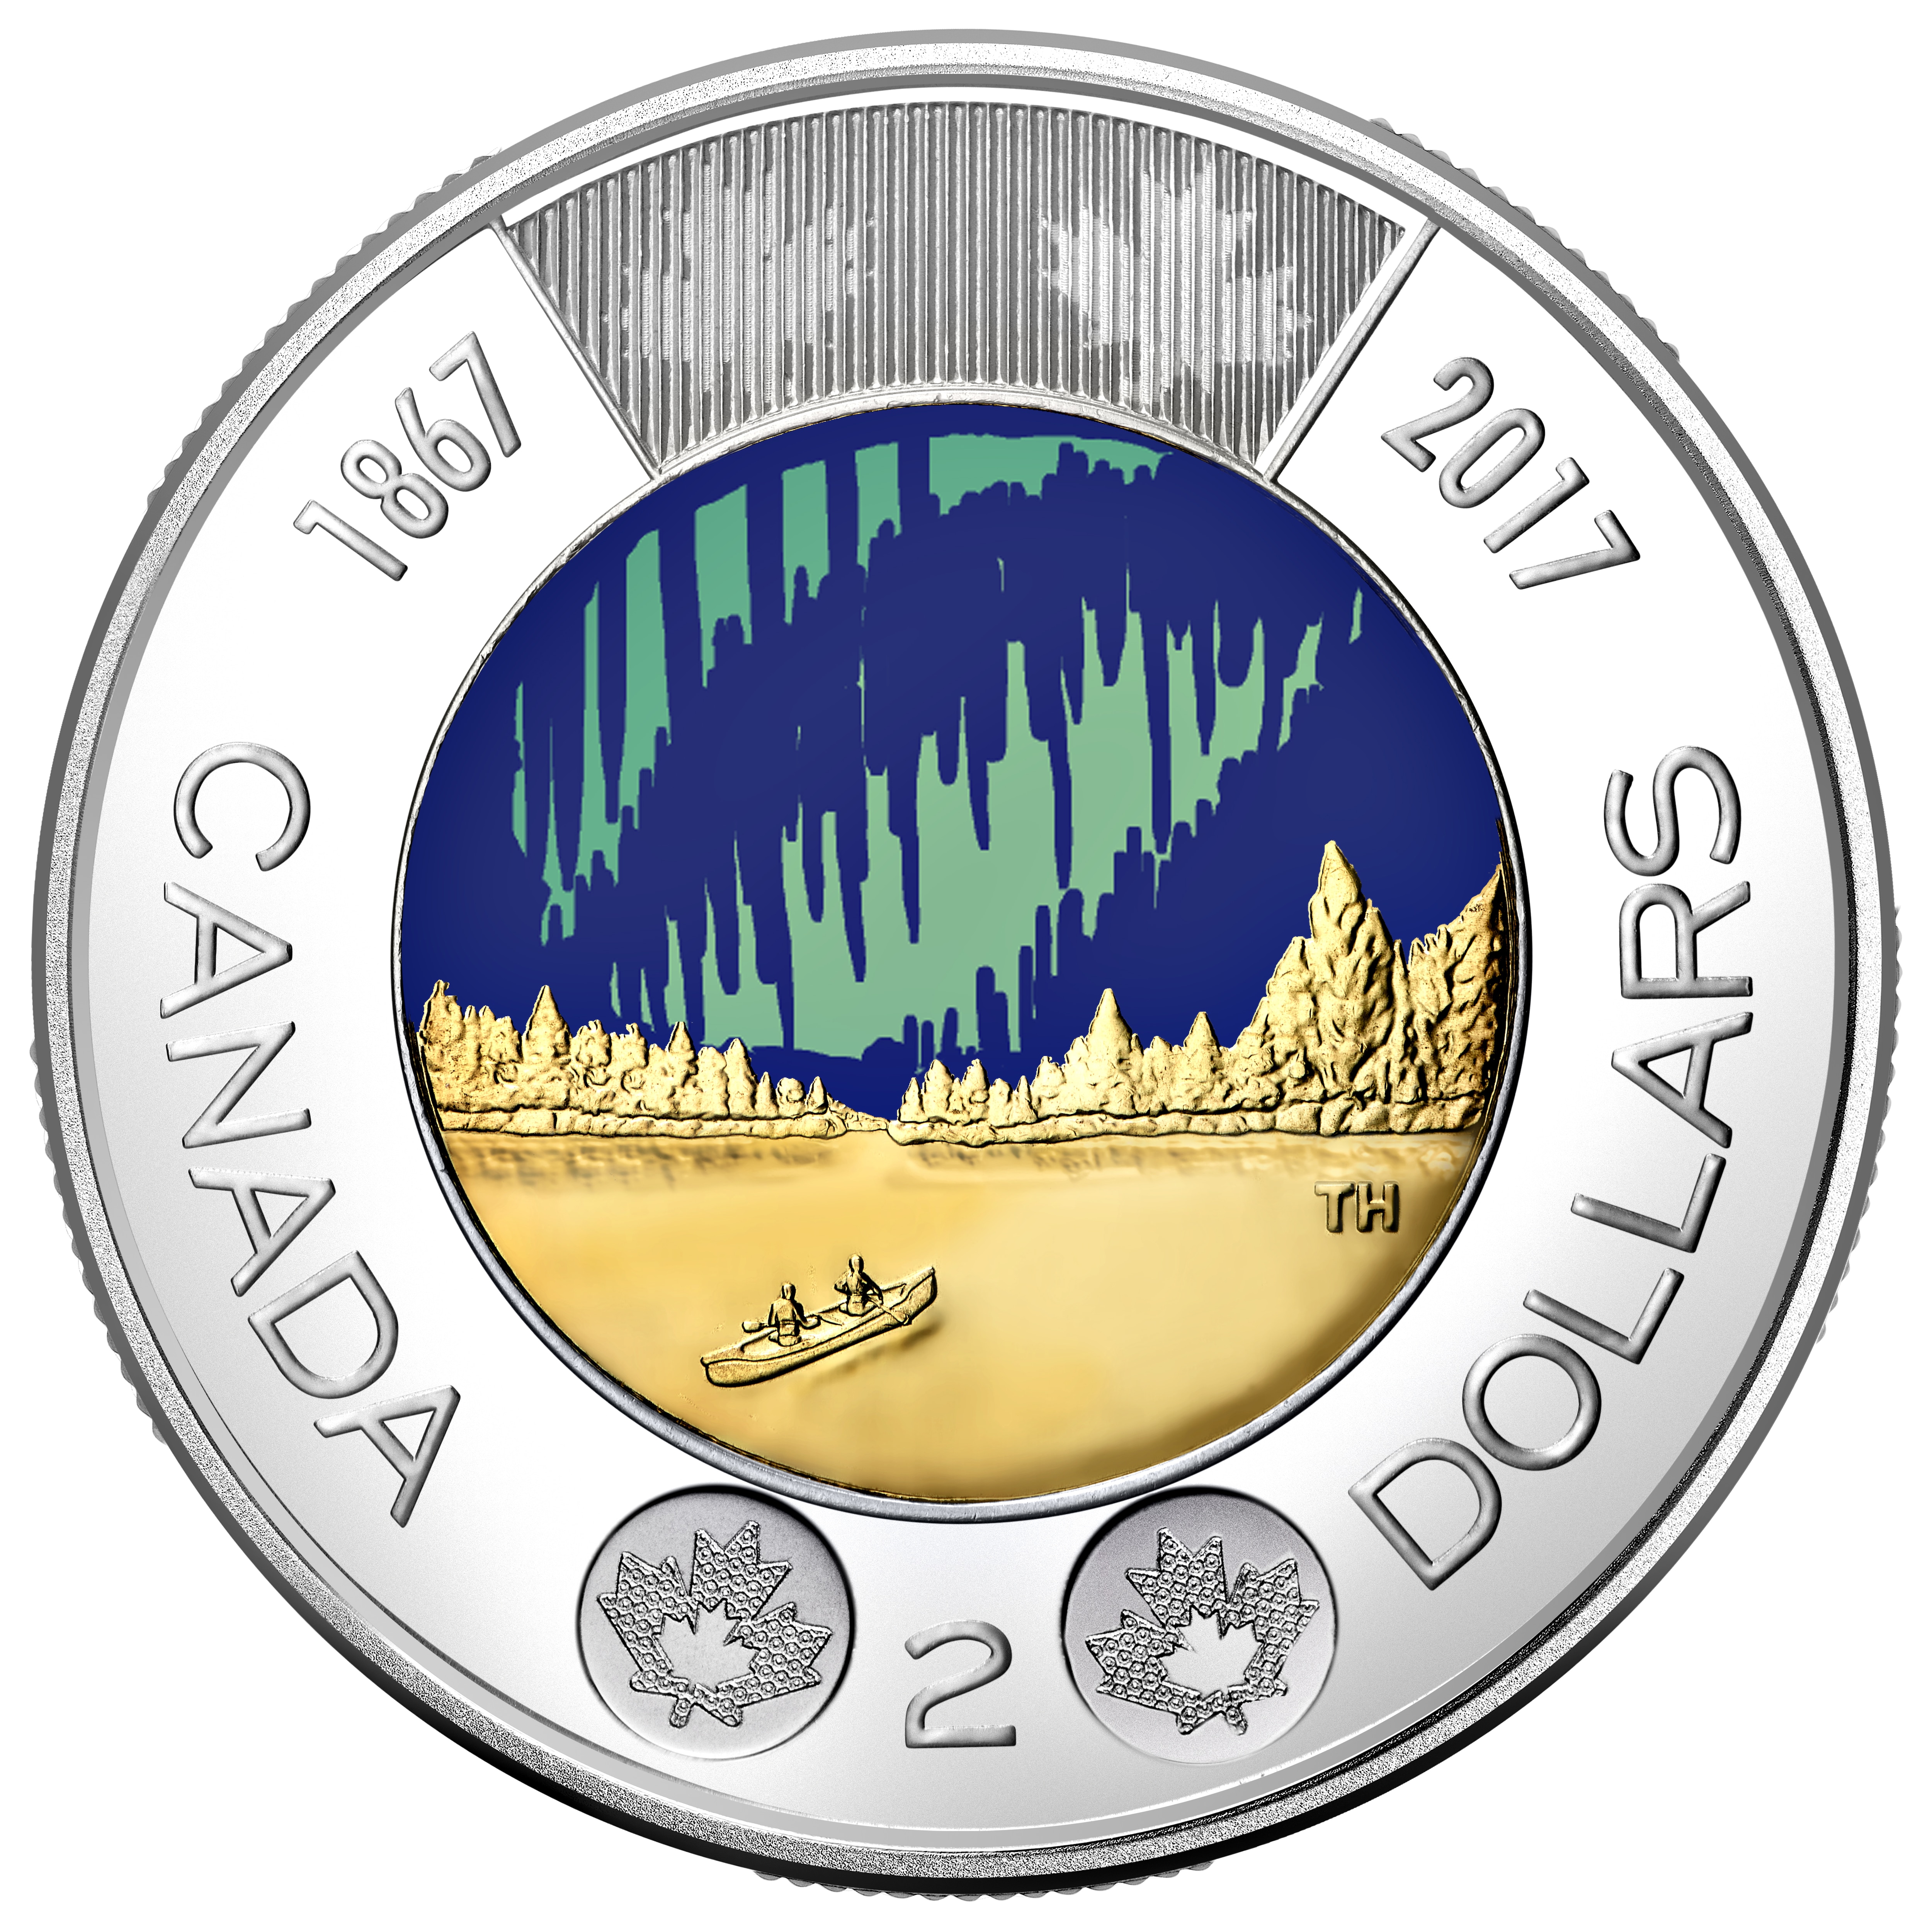 2017 Canada Uncirculated Commemorative Hope For Green Future 25 Cent